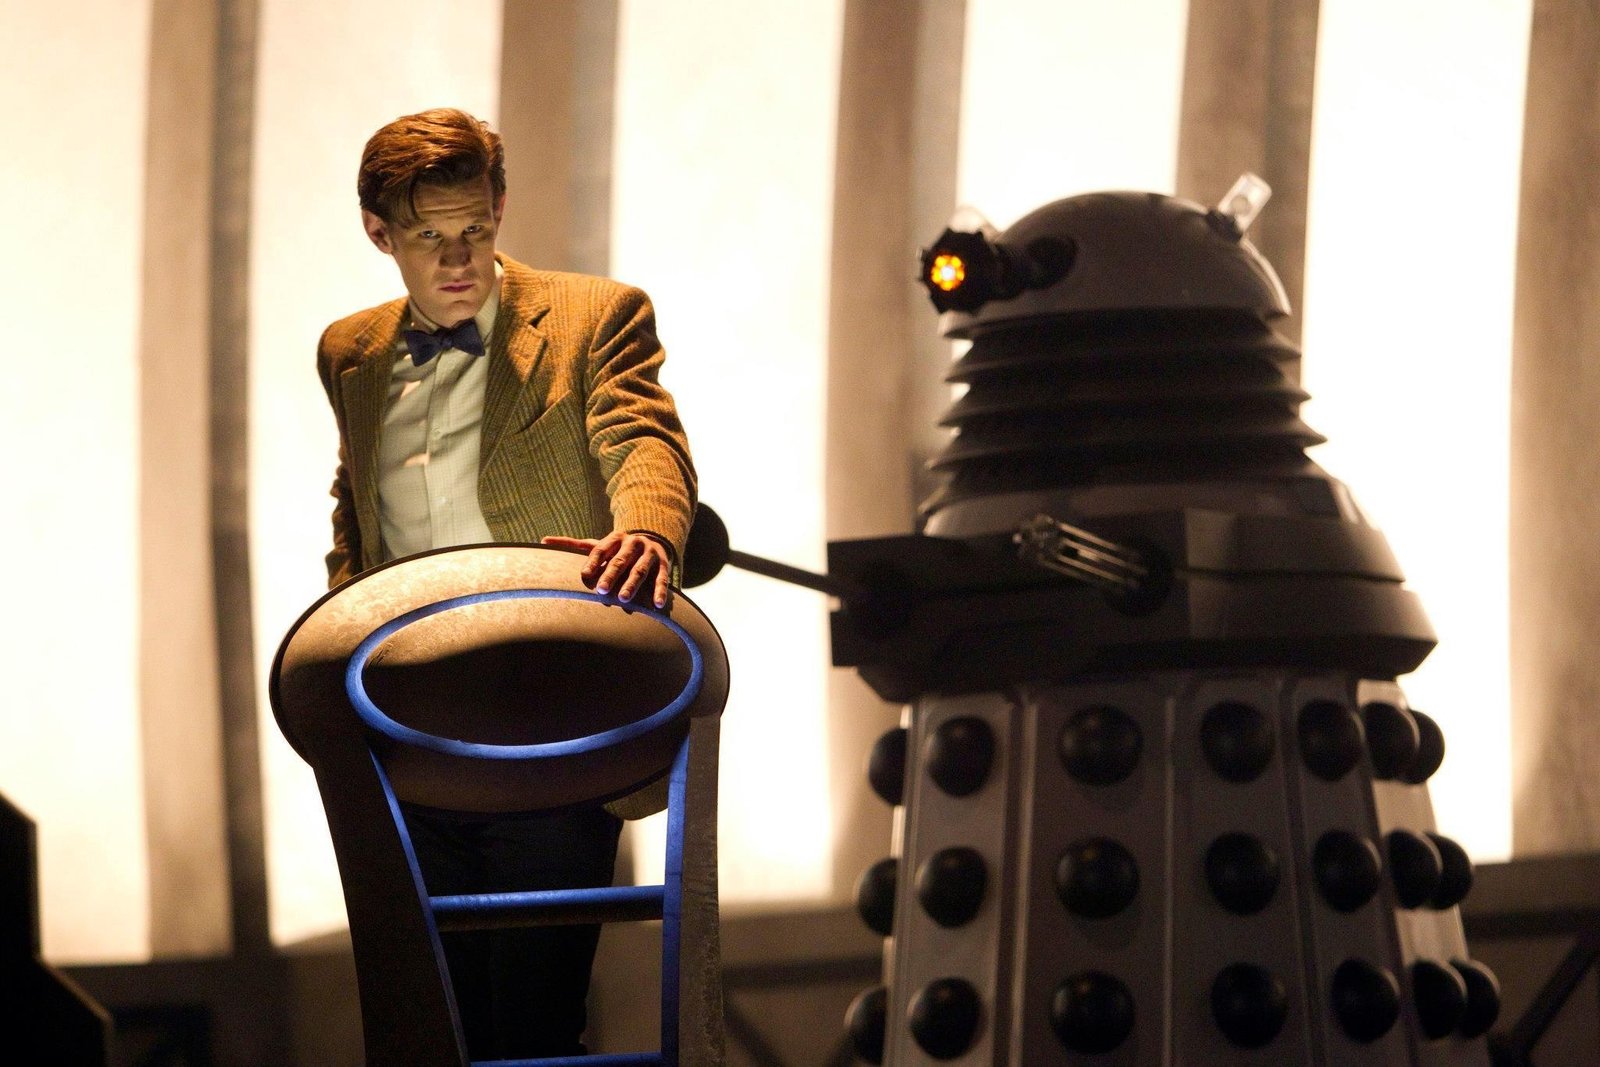 Can You Help this Dalek World Record Attempt Next Year?